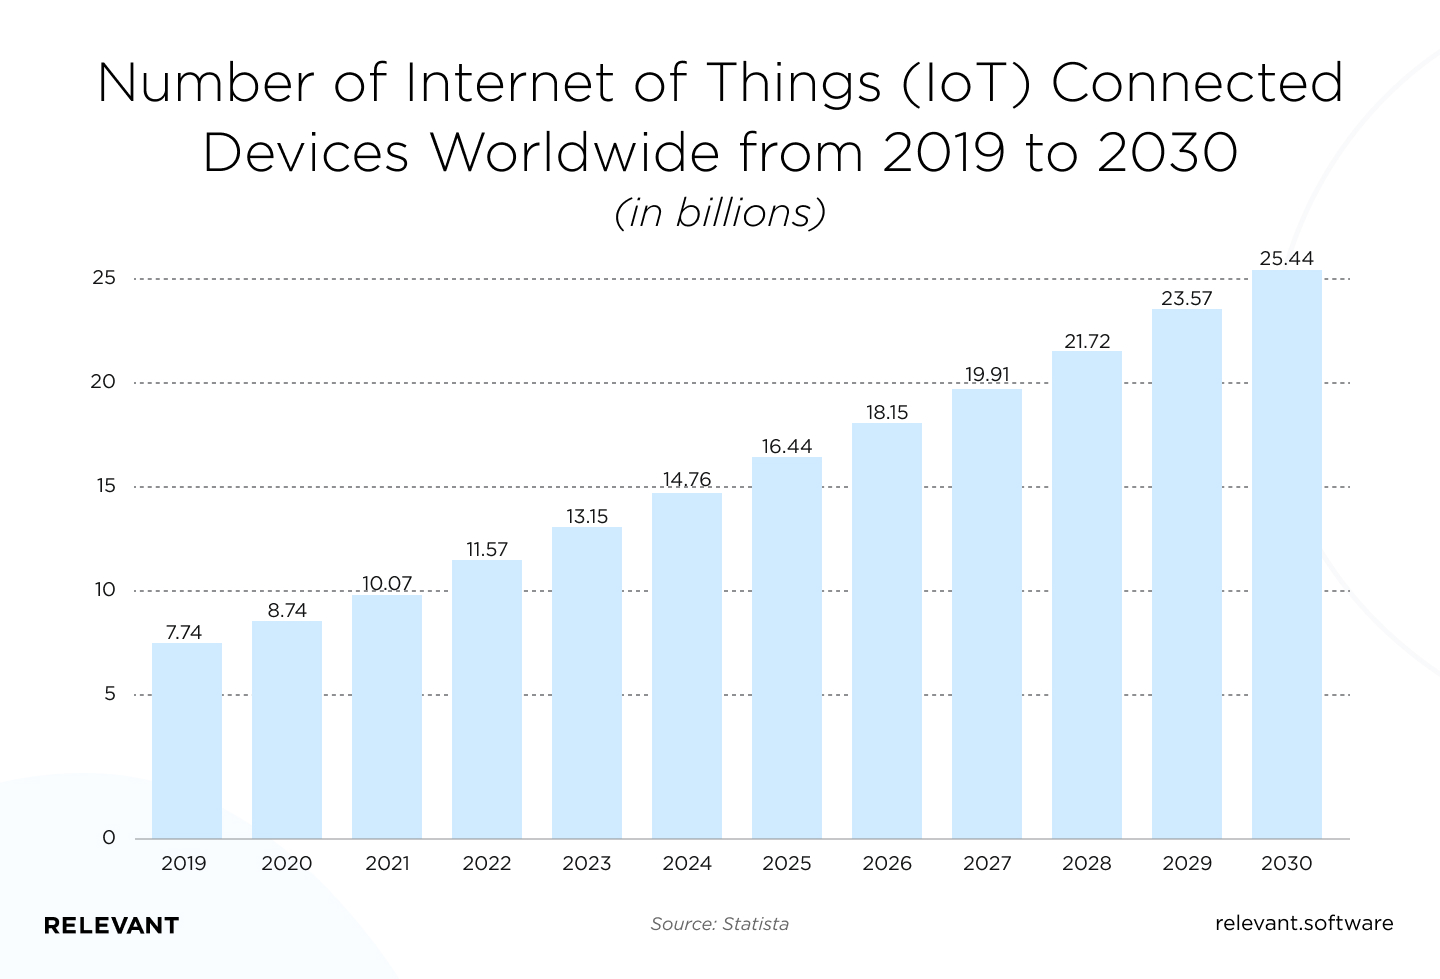 Number of Internet of Things (IoT) Connected Devices Worldwide from 2019 to 2030